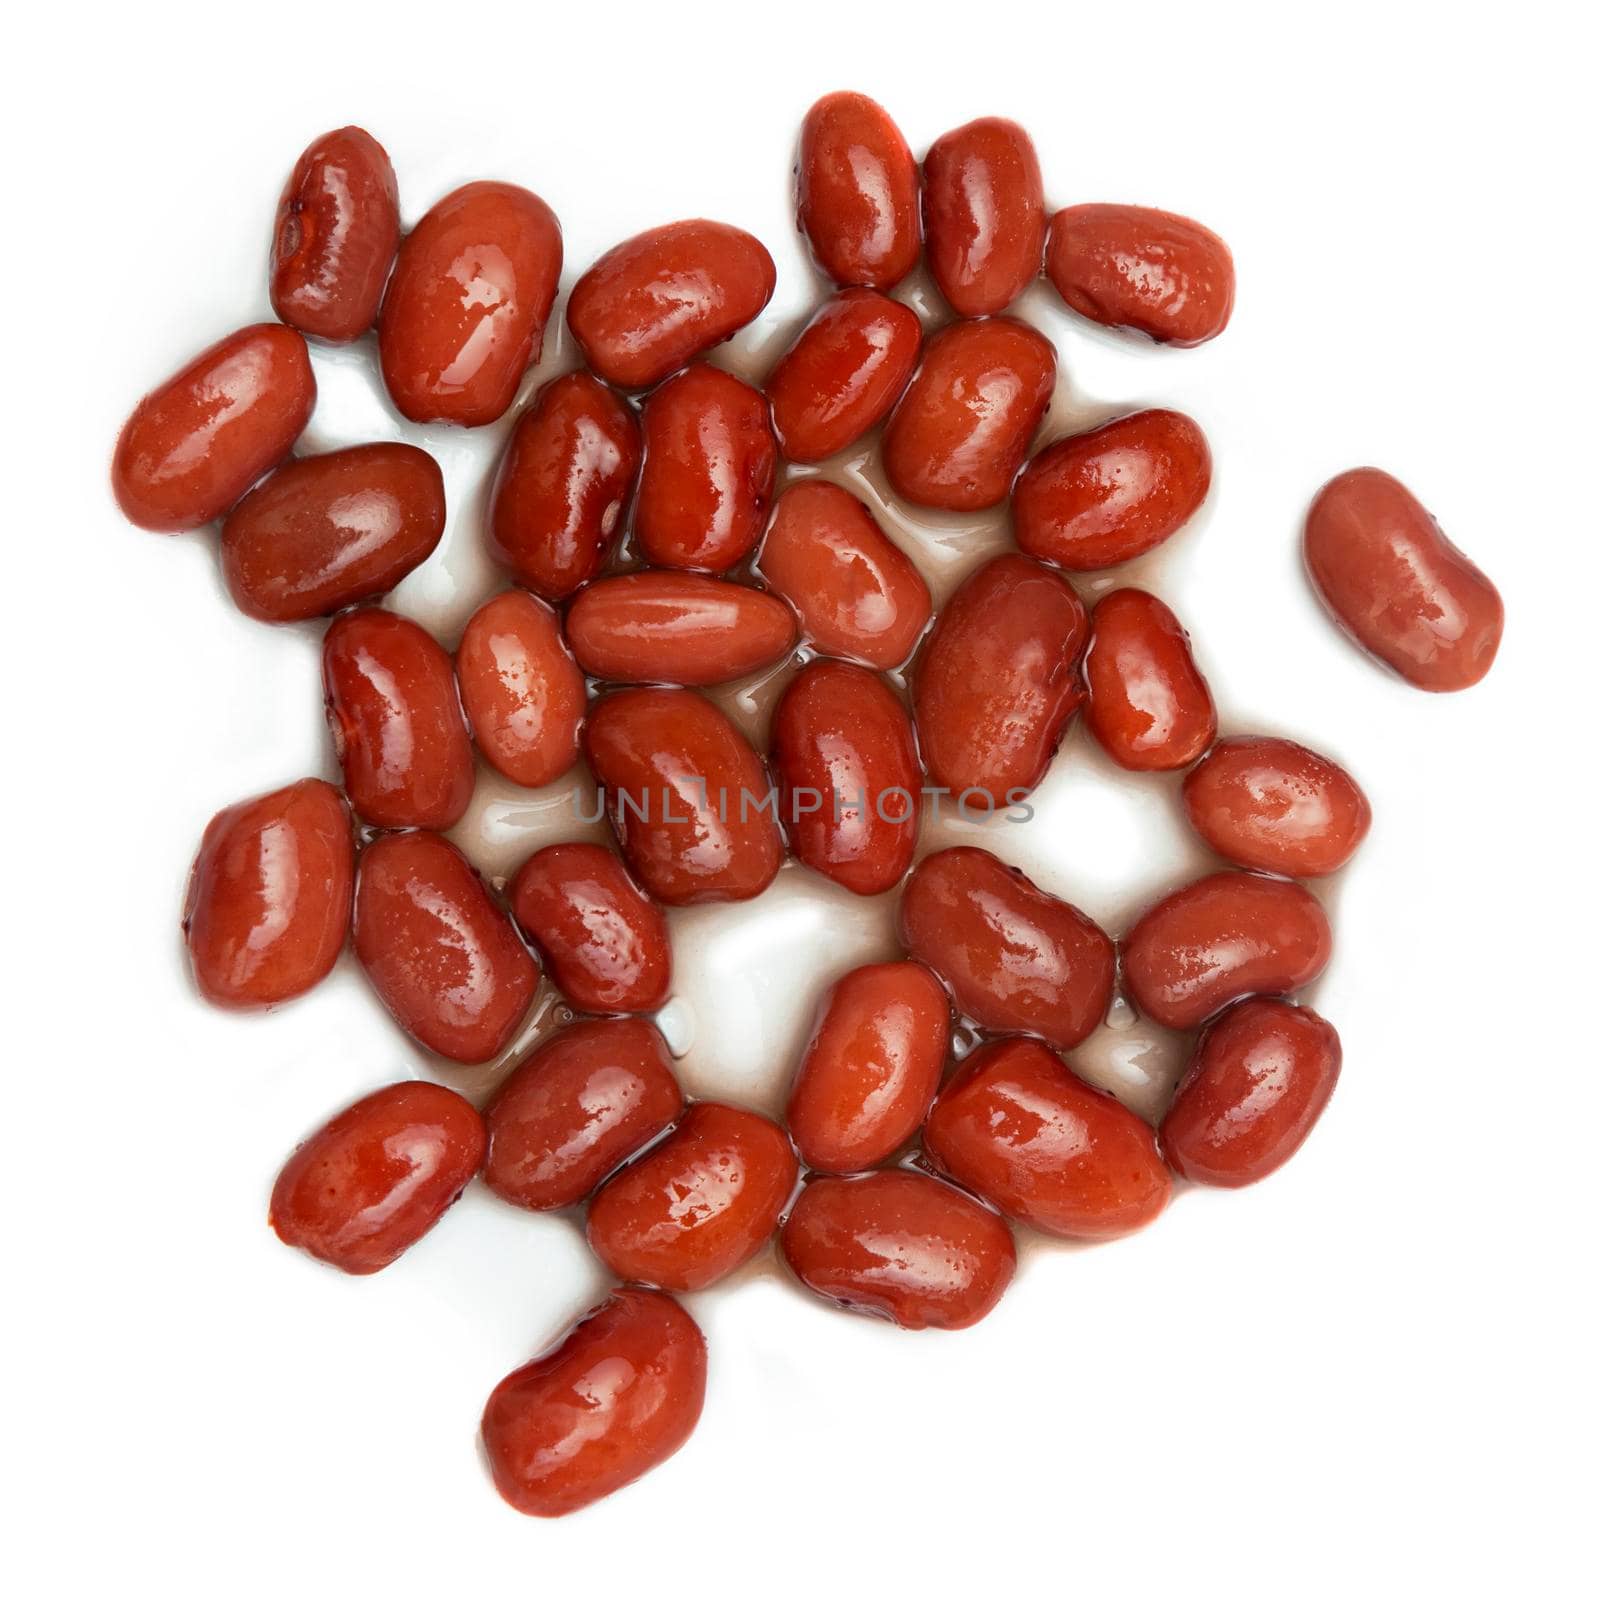 cooked kidney red beans closeup background